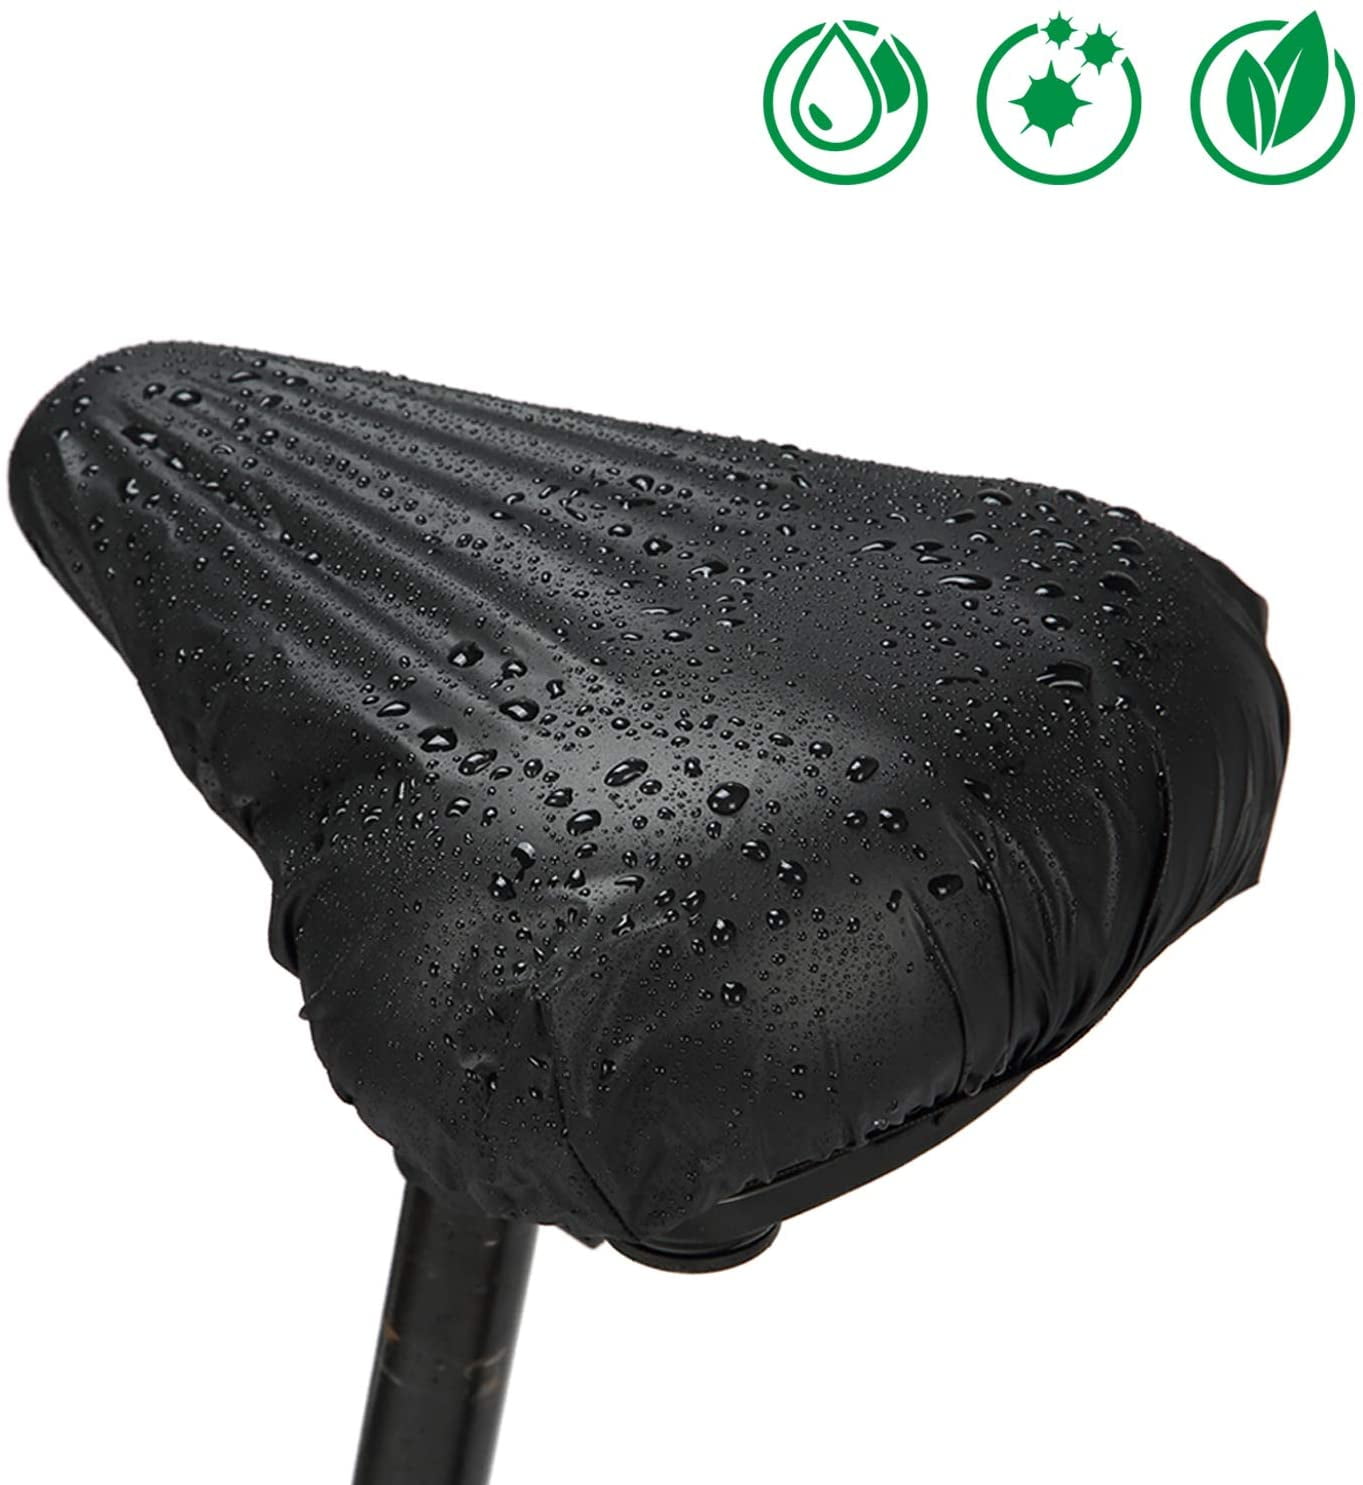 Details about   Waterproof Bike Seat Rain Cover And Dust Resistant Bicycle Saddle Protector JA 